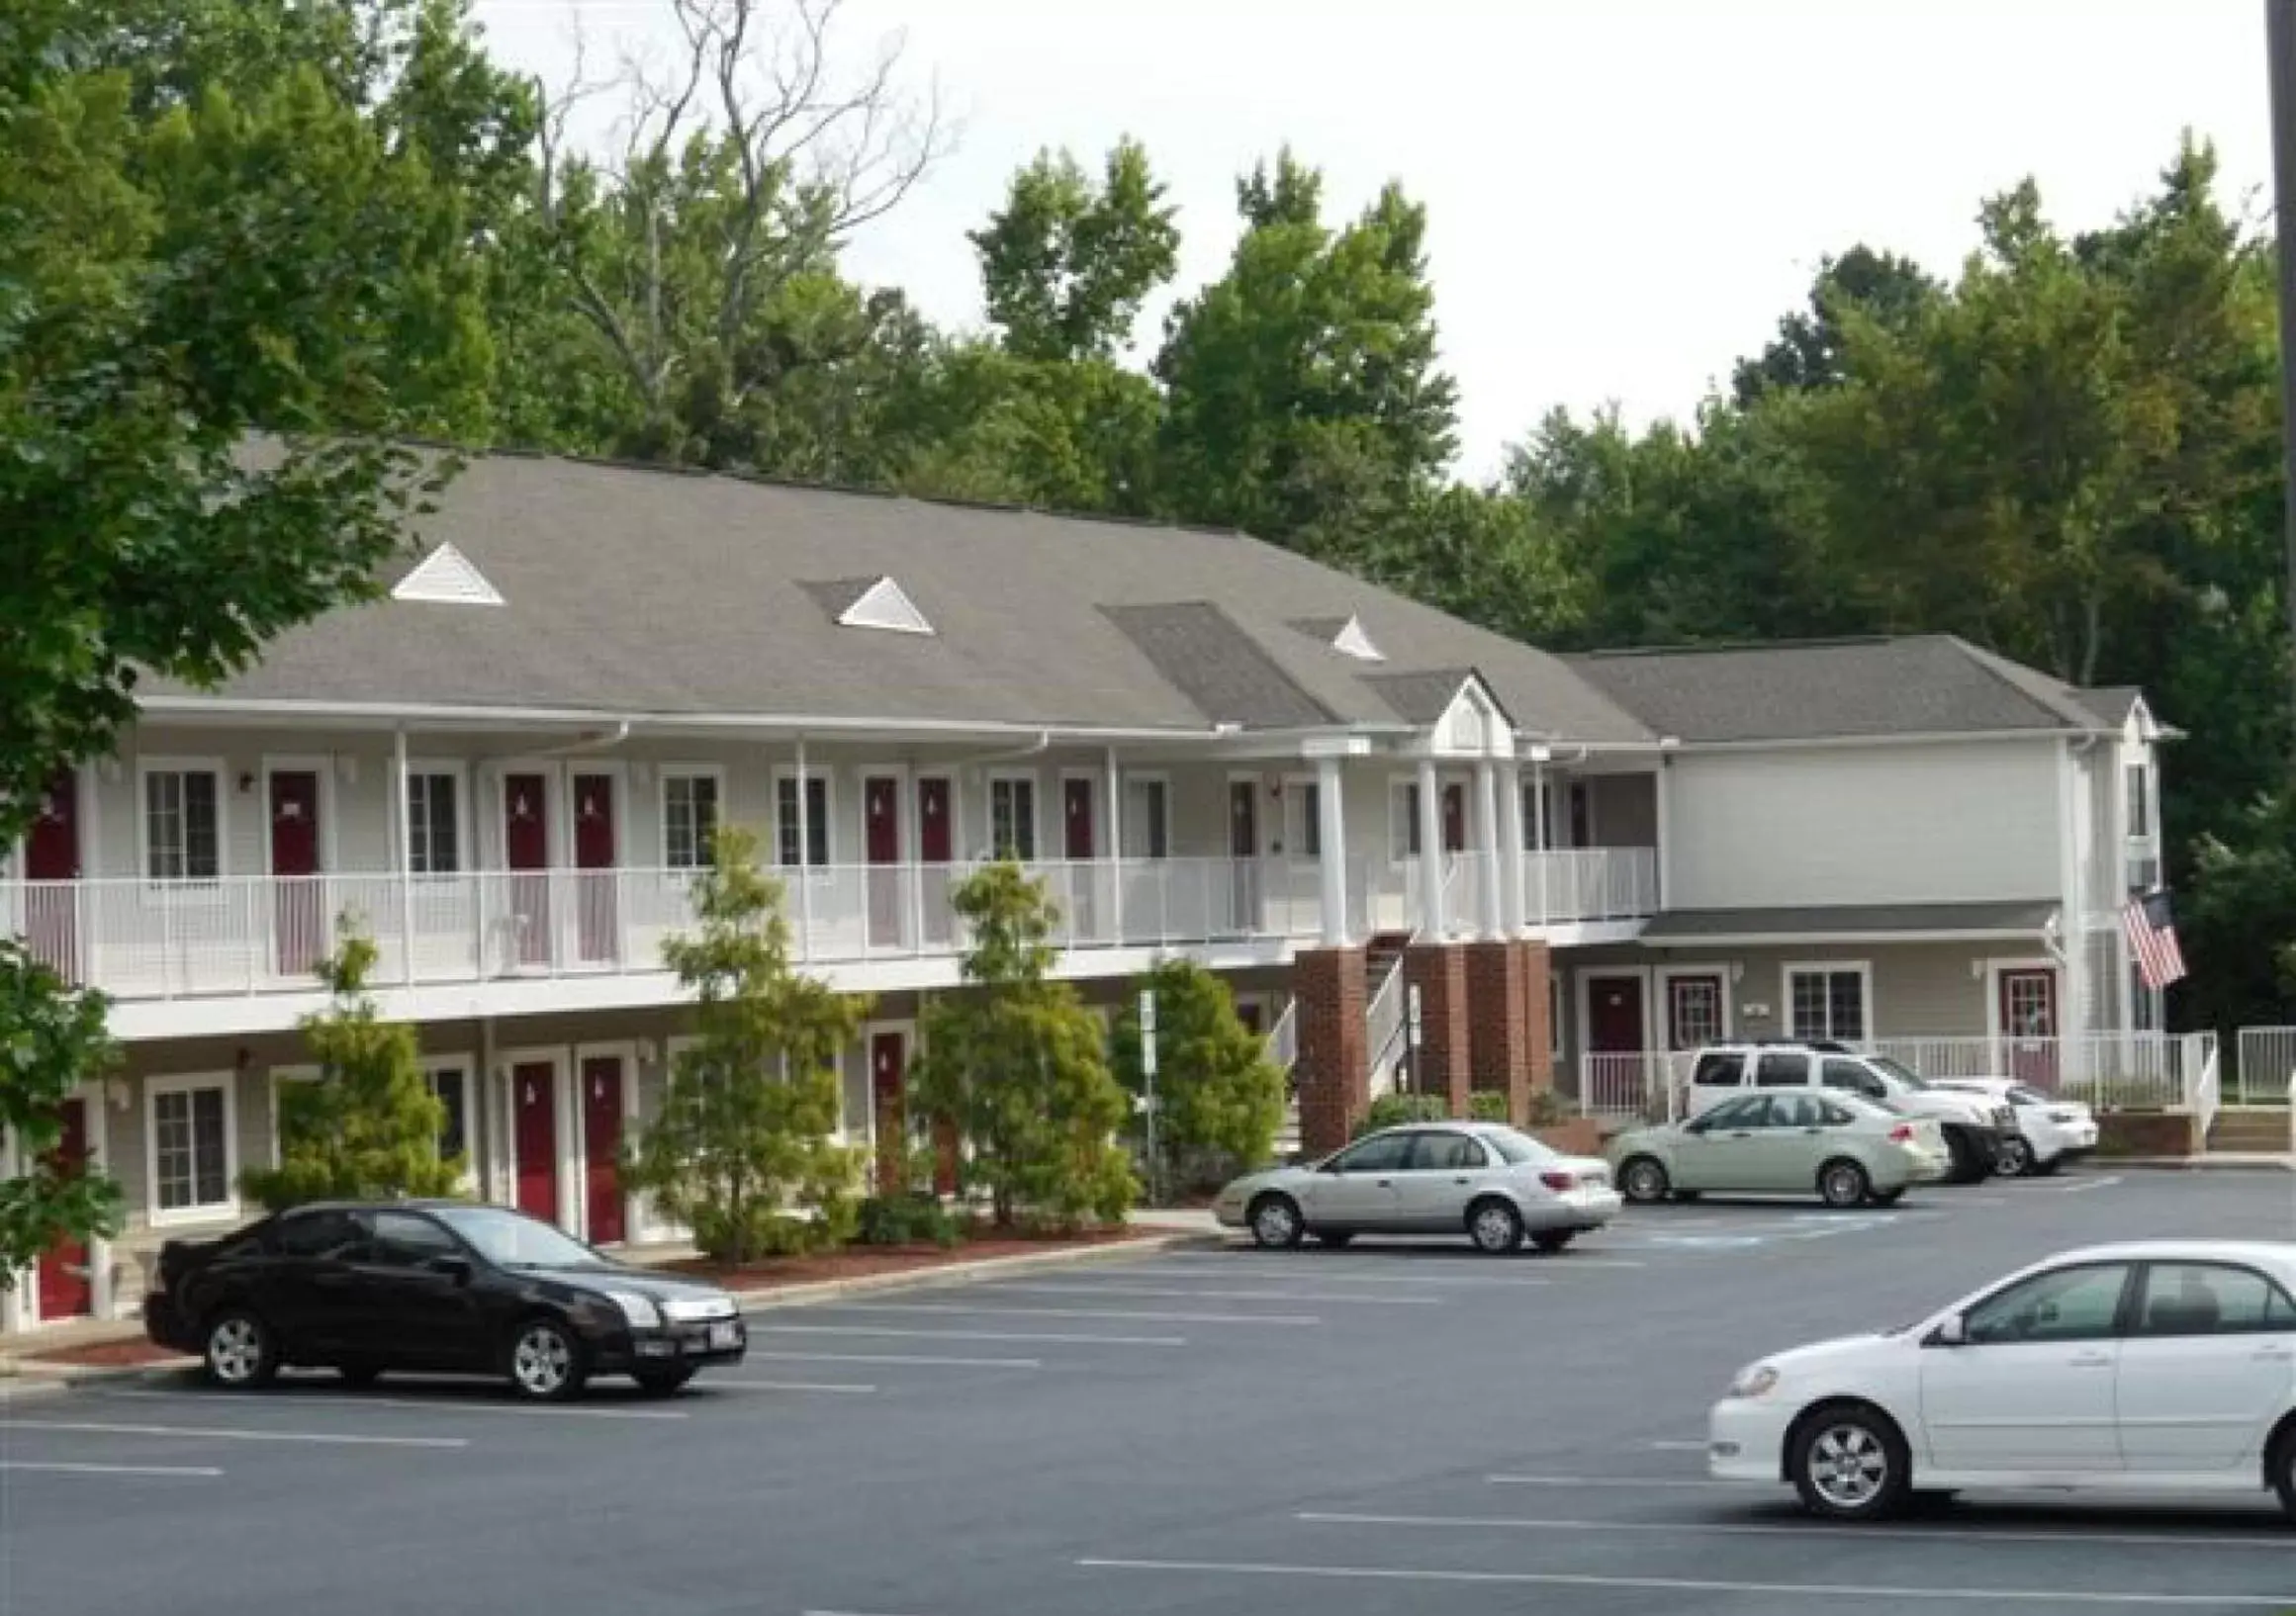 Property Building in Affordable Suites Greenville